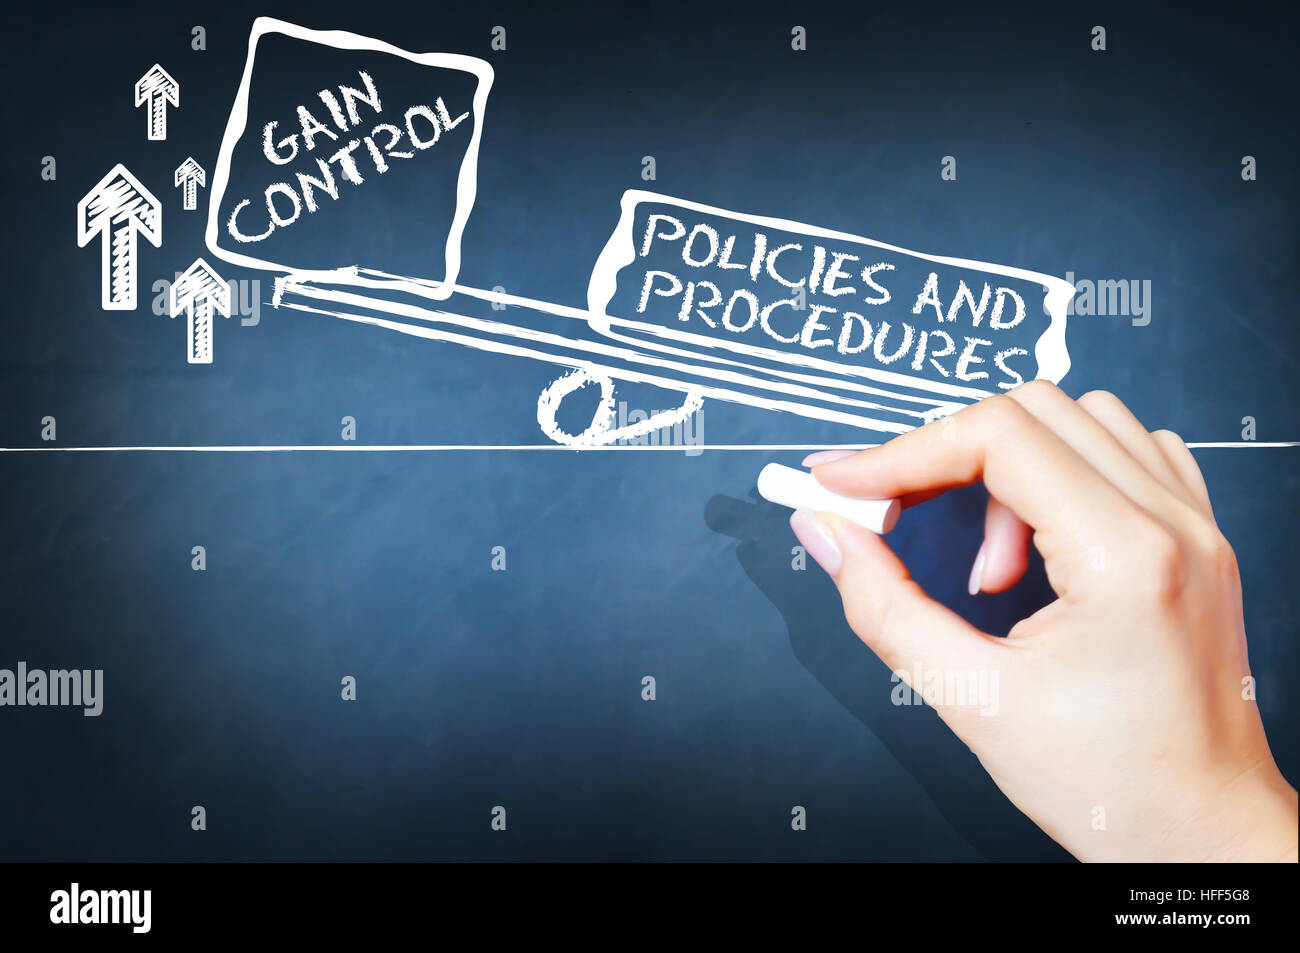 Company policies and procedures concept on blackboard with seesaw Stock Photo